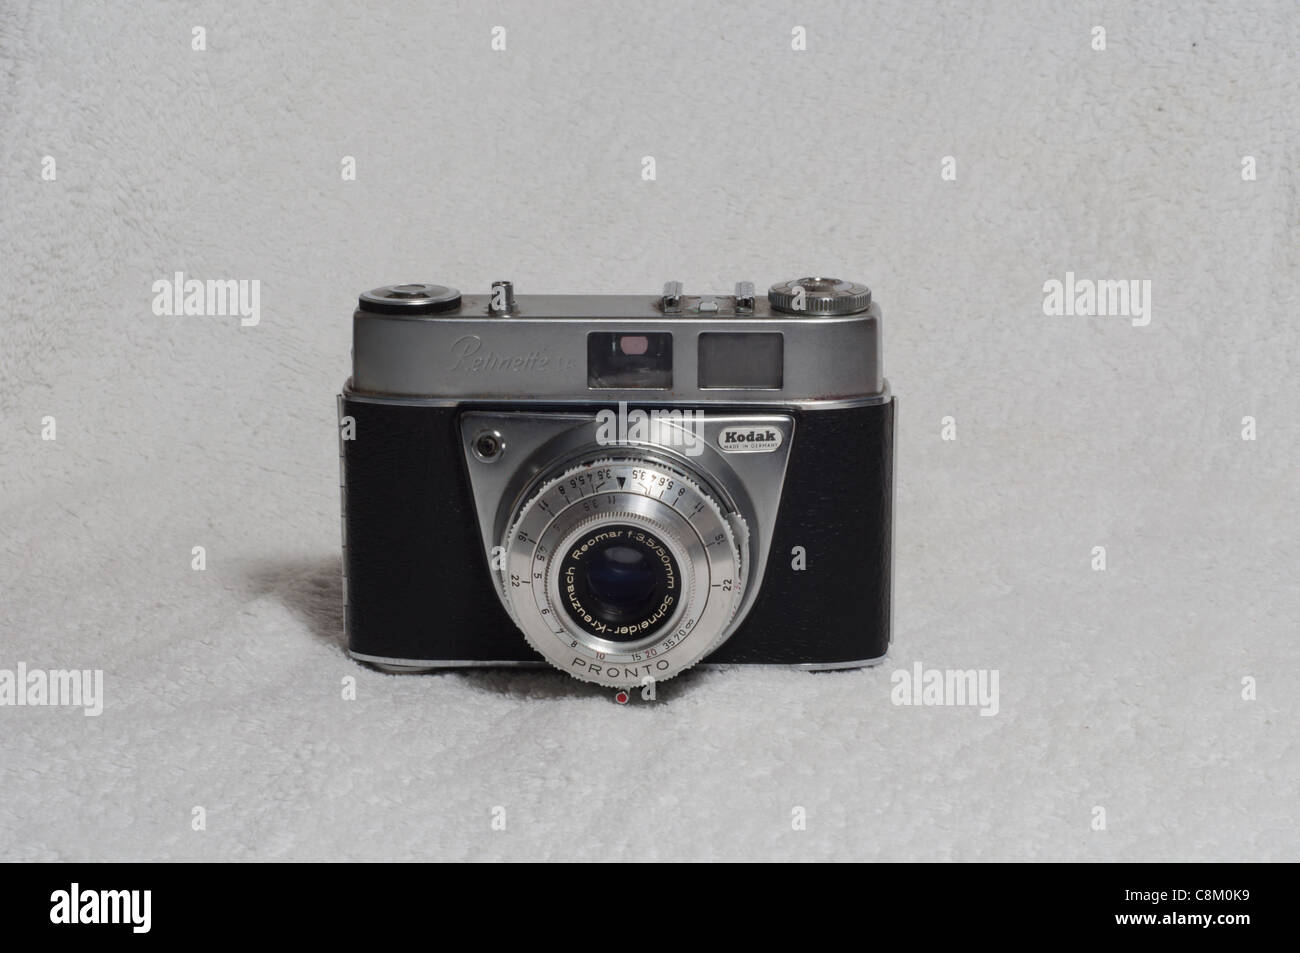 The Kodak Retinette 1A is a 35mm film viewfinder camera made by Kodak AG and produced between 1959-66. Stock Photo